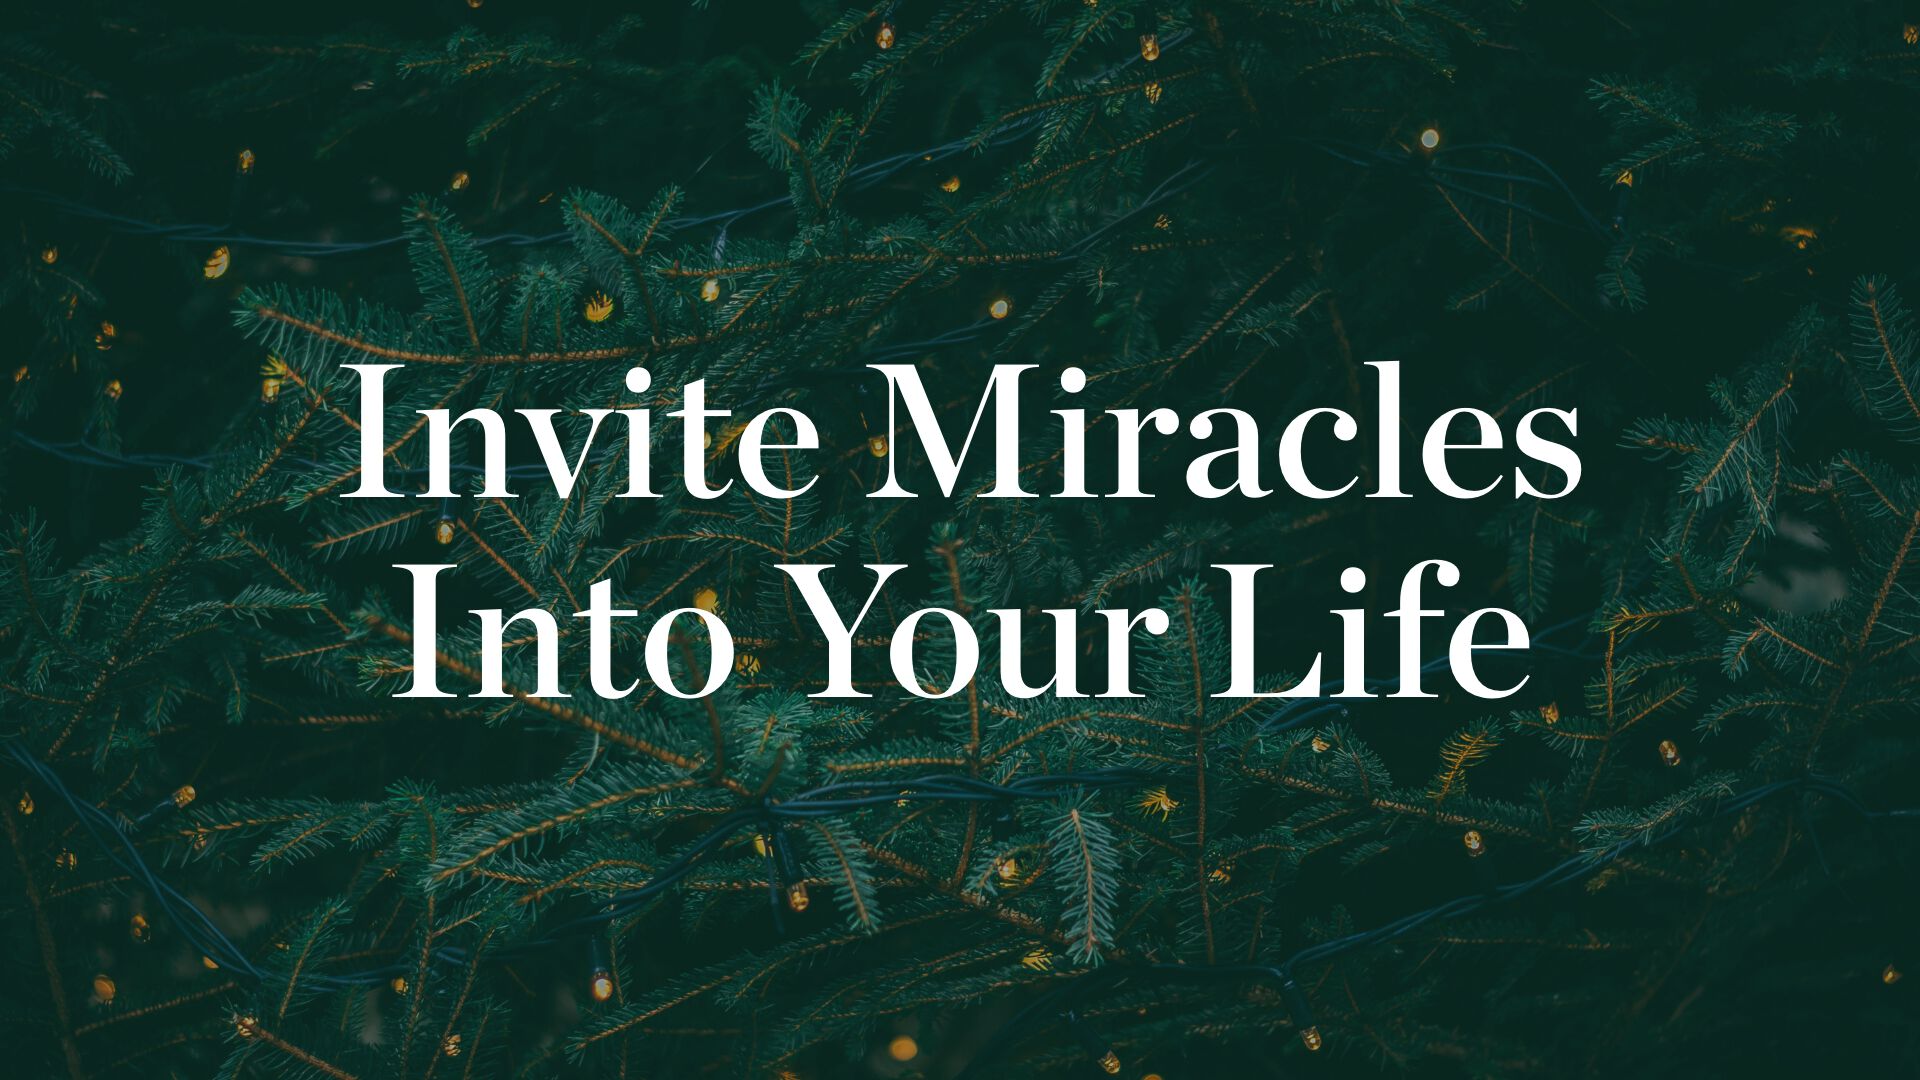 Invite Miracles Into Your Life